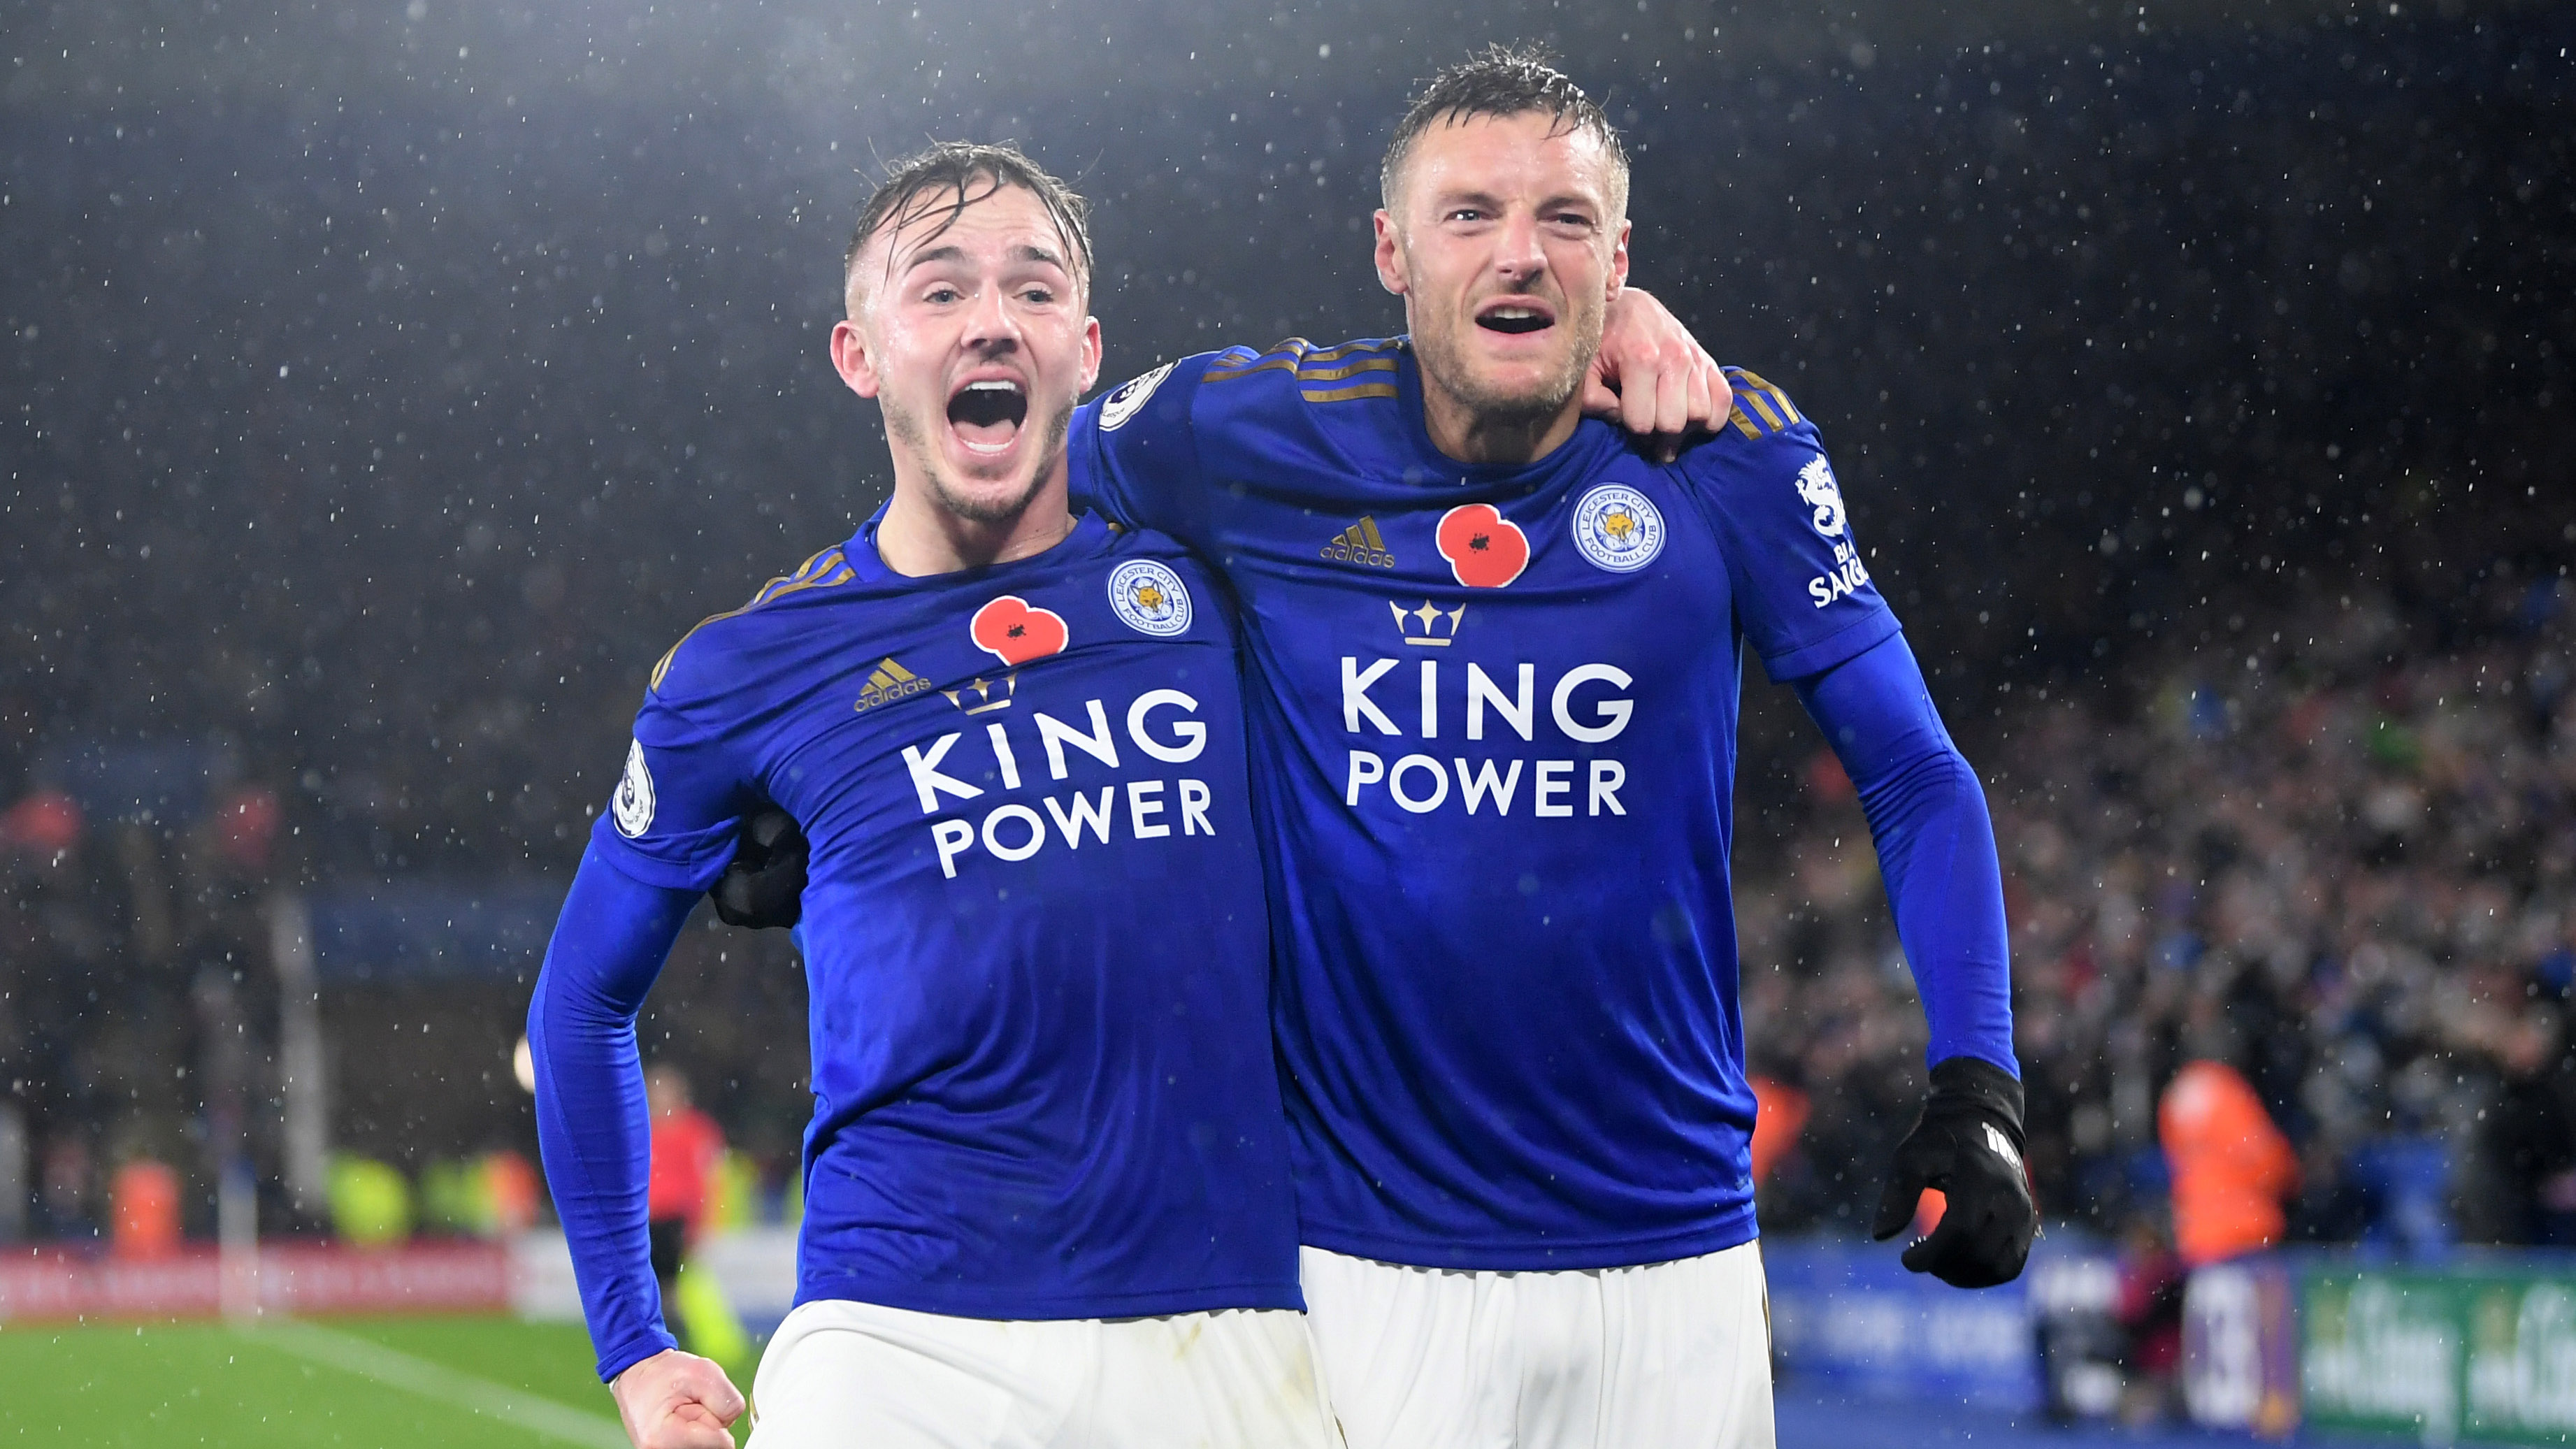 Leicester 2-0 highlights and stats: Jamie Vardy and James Maddison score in key Premier League win